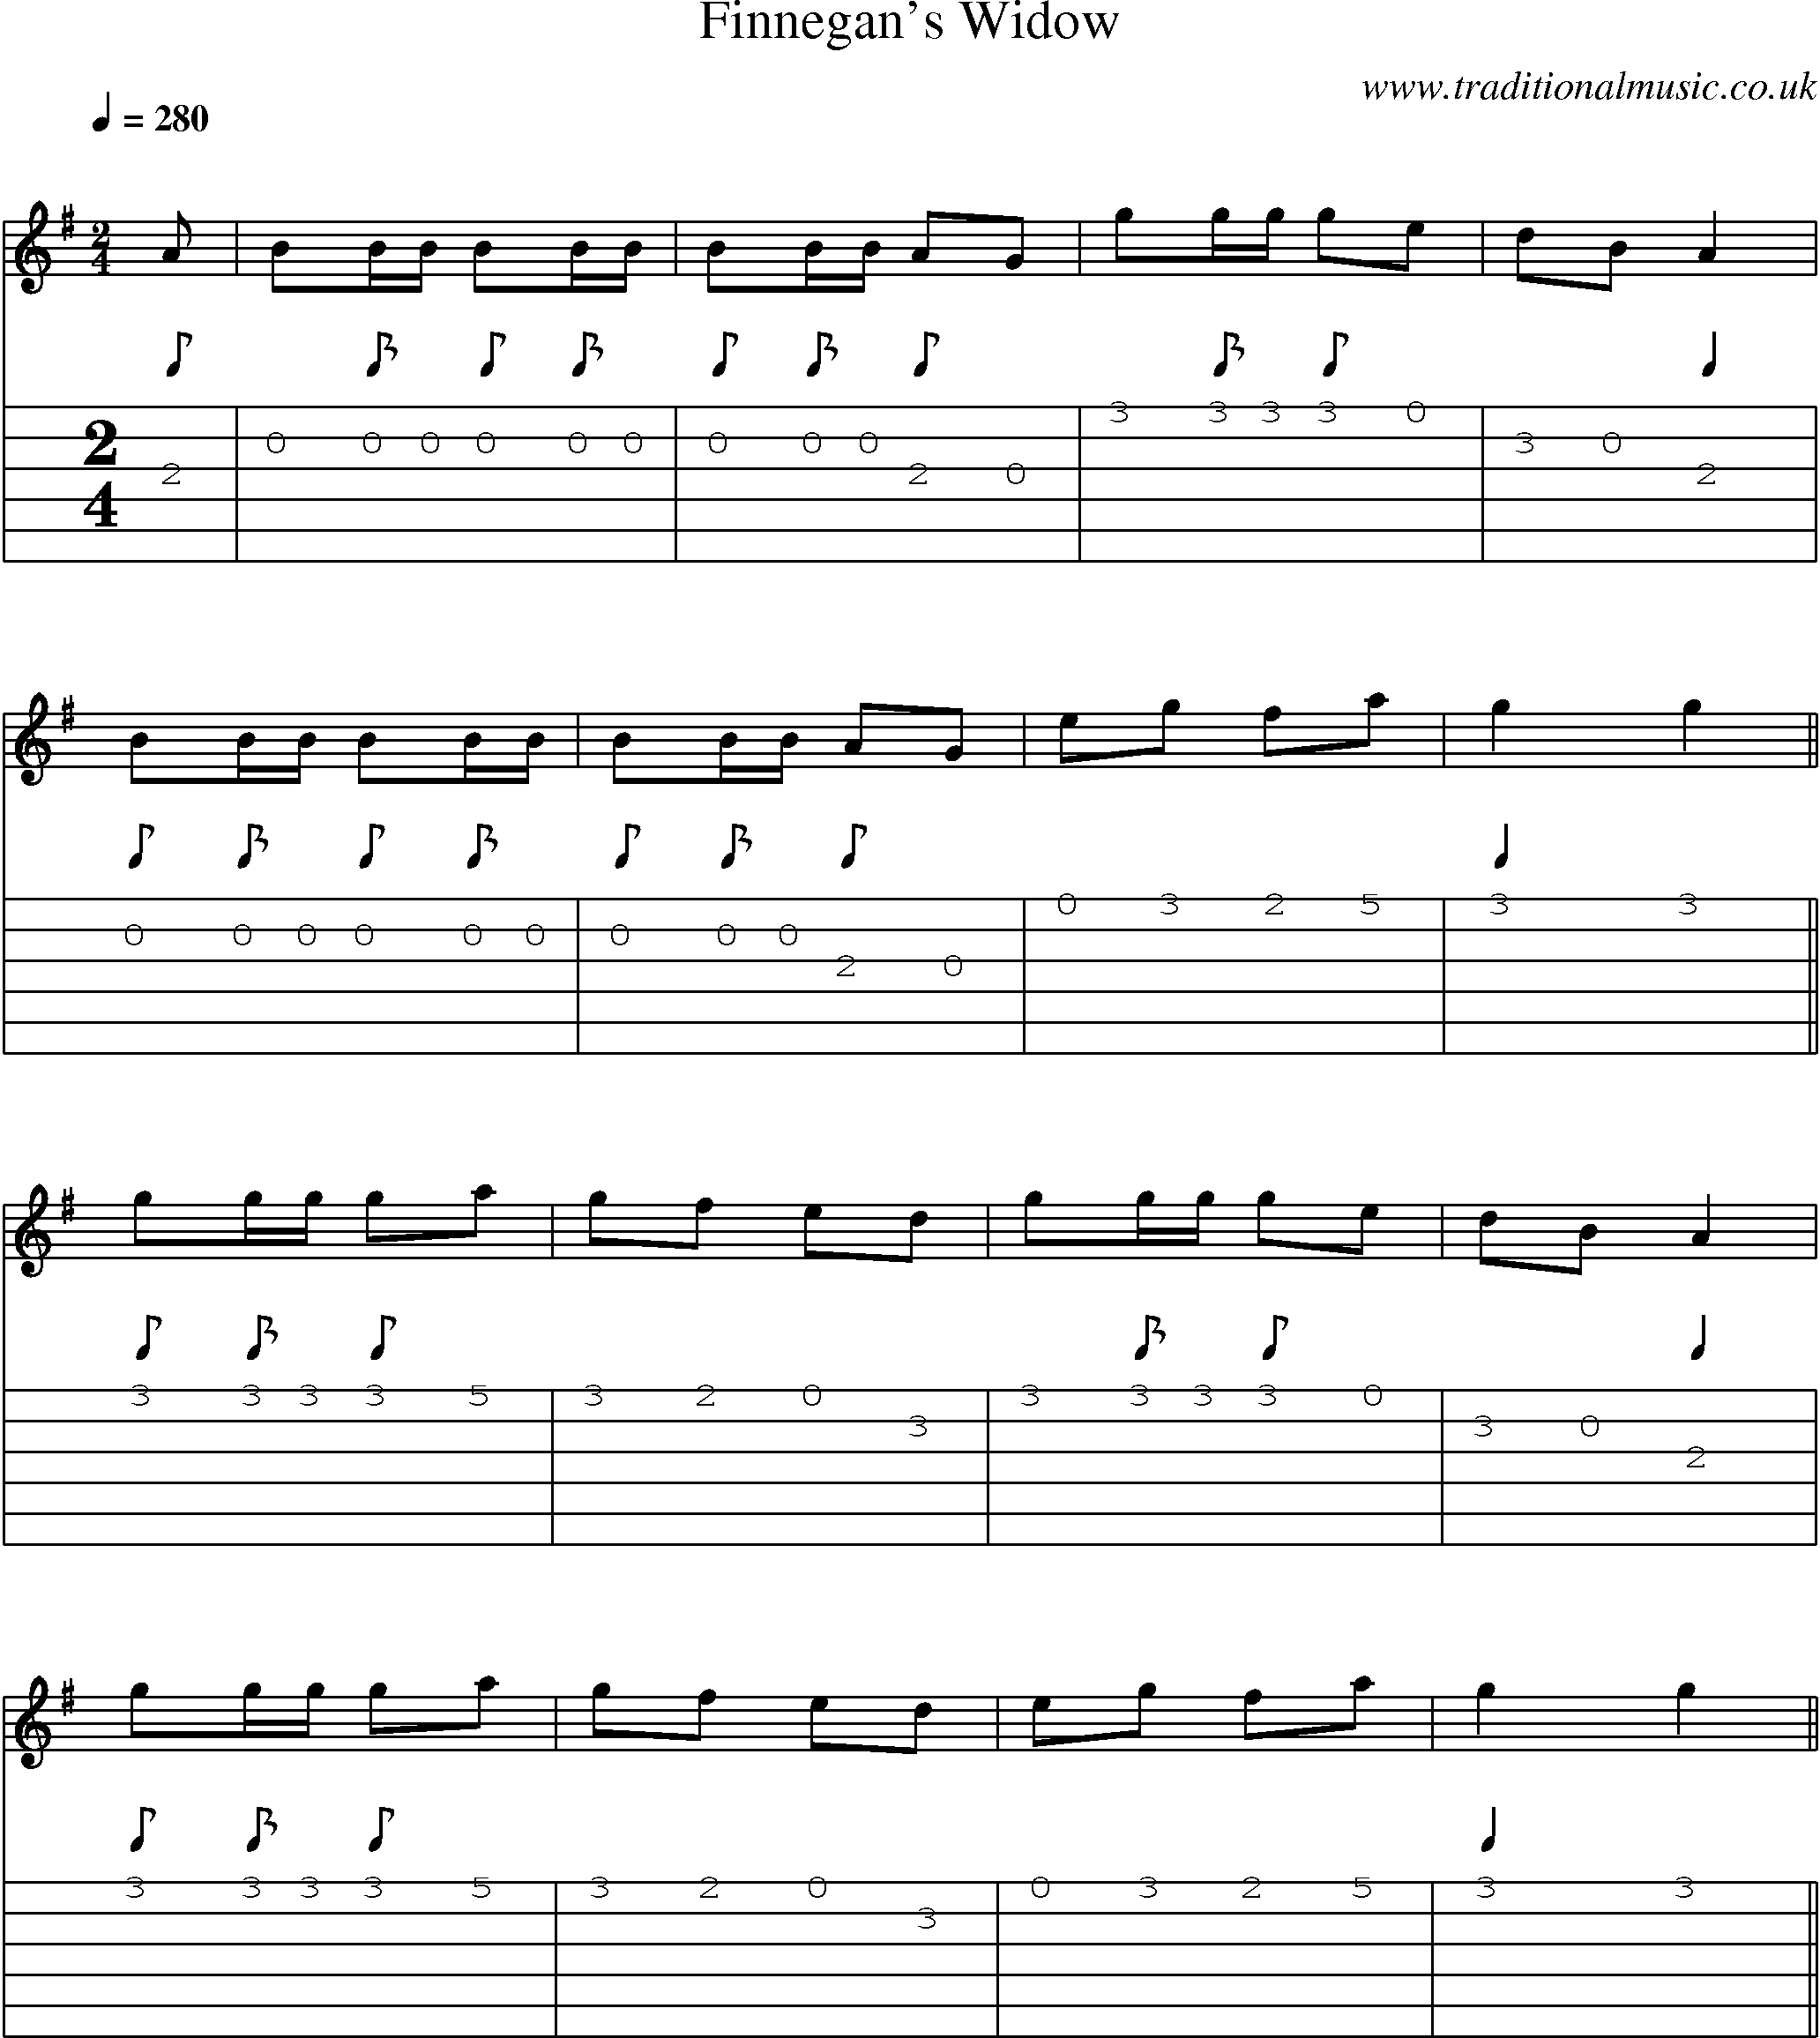 Music Score and Guitar Tabs for Finnegans Widow